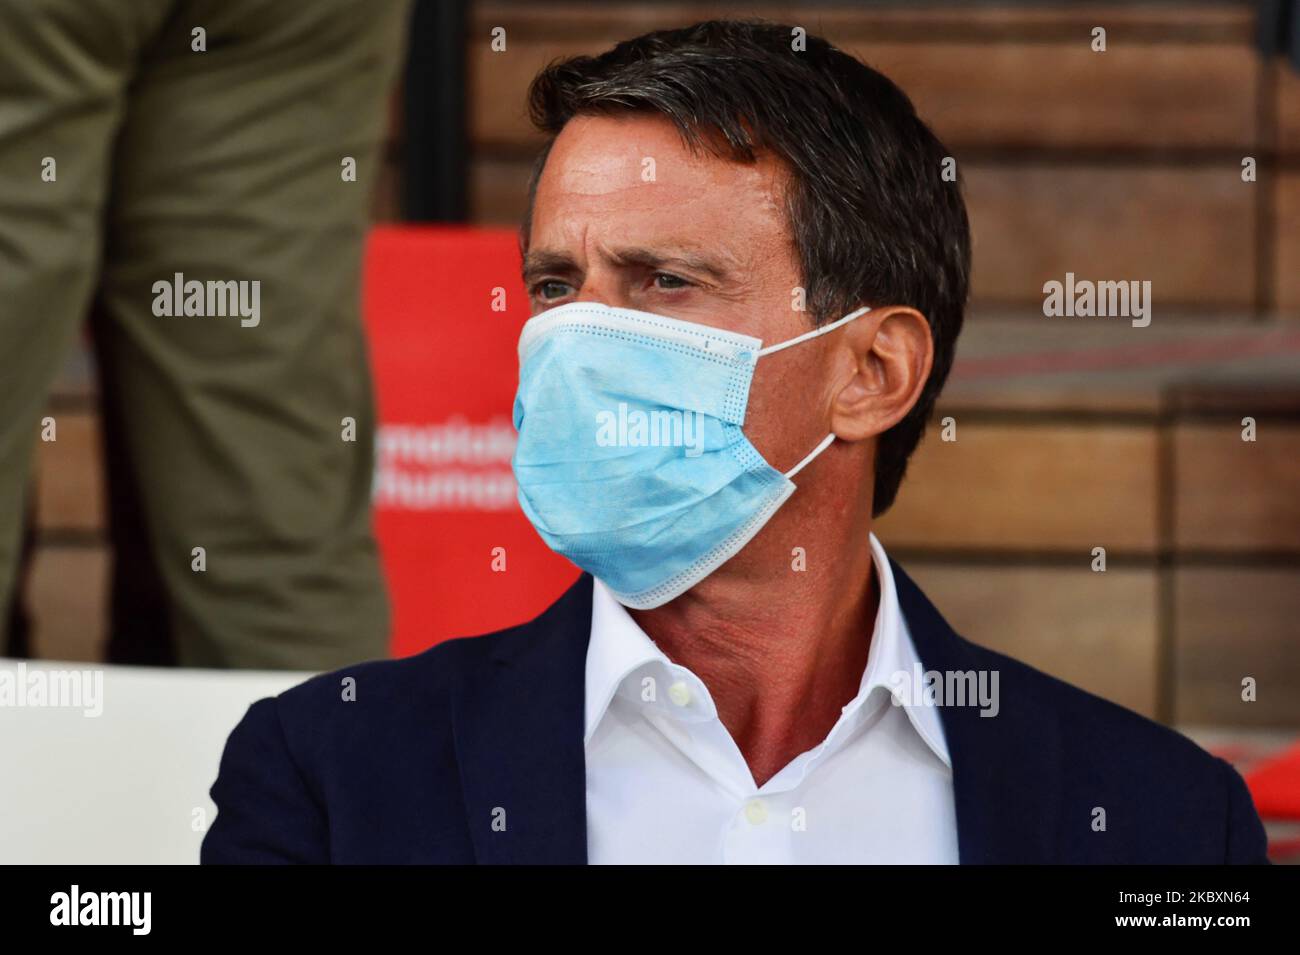 Former French Prime Minister Manuel Valls attends at the meeting of French employers' association Medef themed 'The Renaissance of French Companies' on August 27, 2020, in Paris, France. (Photo by Daniel Pier/NurPhoto) Stock Photo